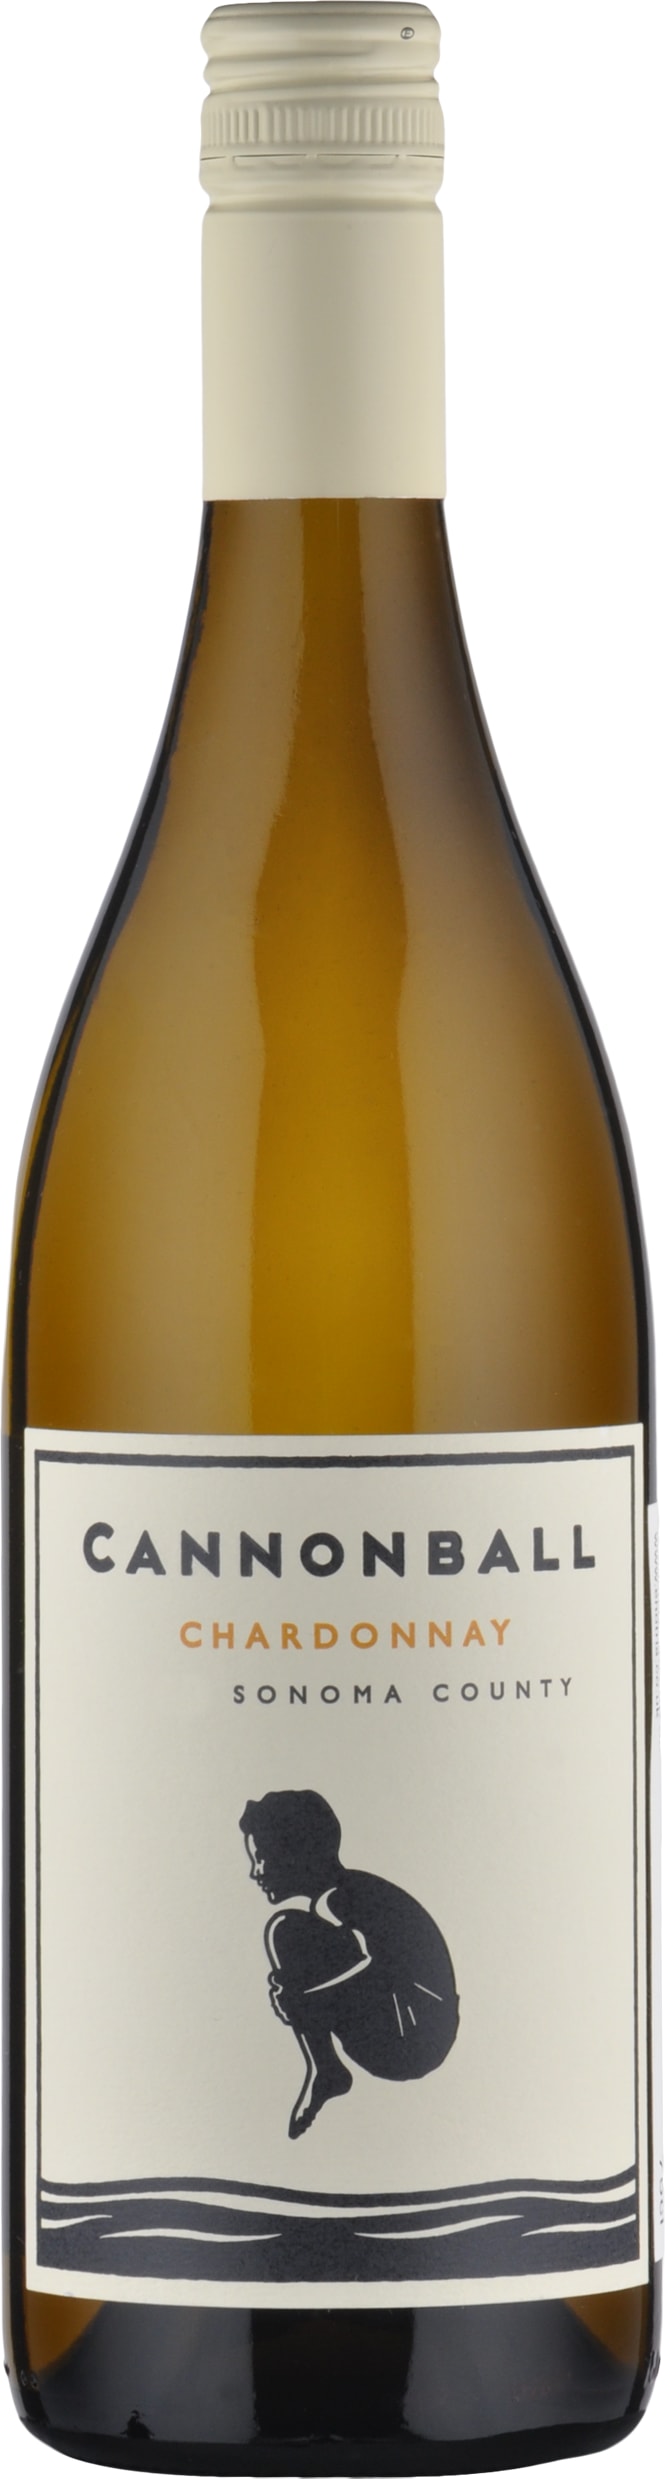 Cannonball Chardonnay 2018 37.5cl - Buy Cannonball Wines from GREAT WINES DIRECT wine shop